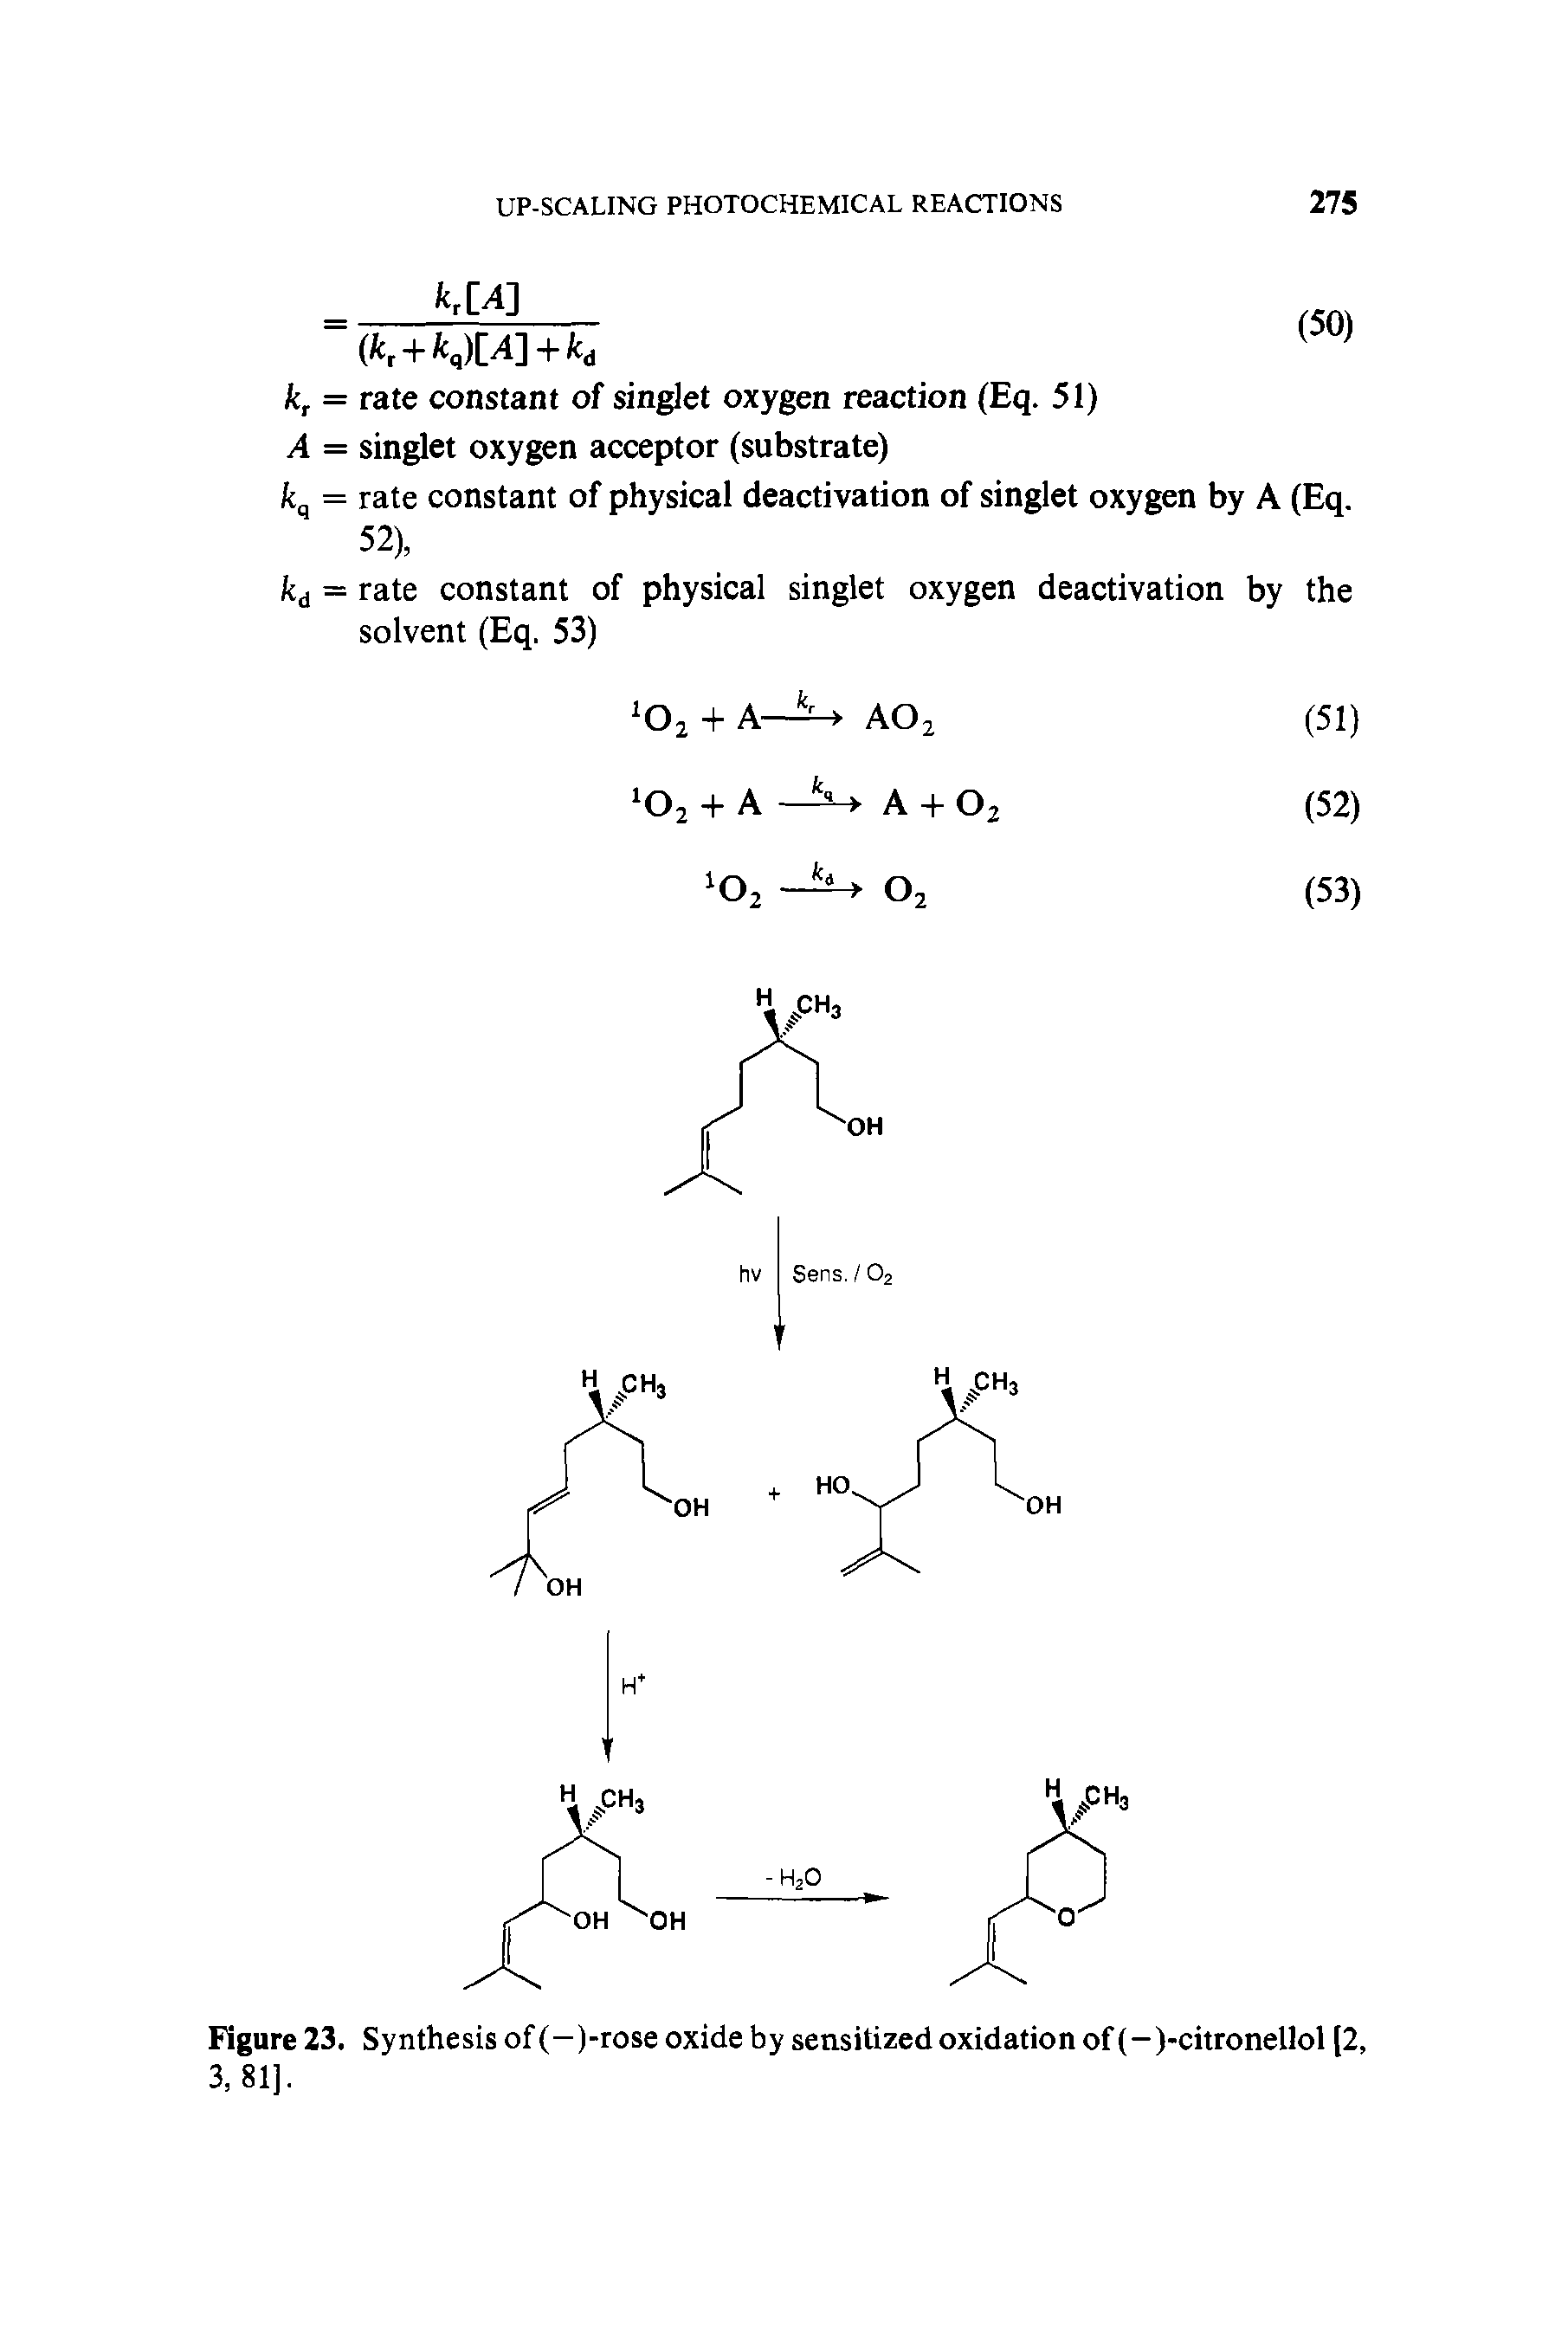 Figure 23. Synthesis of (—)-rose oxide by sensitized oxidation of (-)-citronellol [2, 3,81].